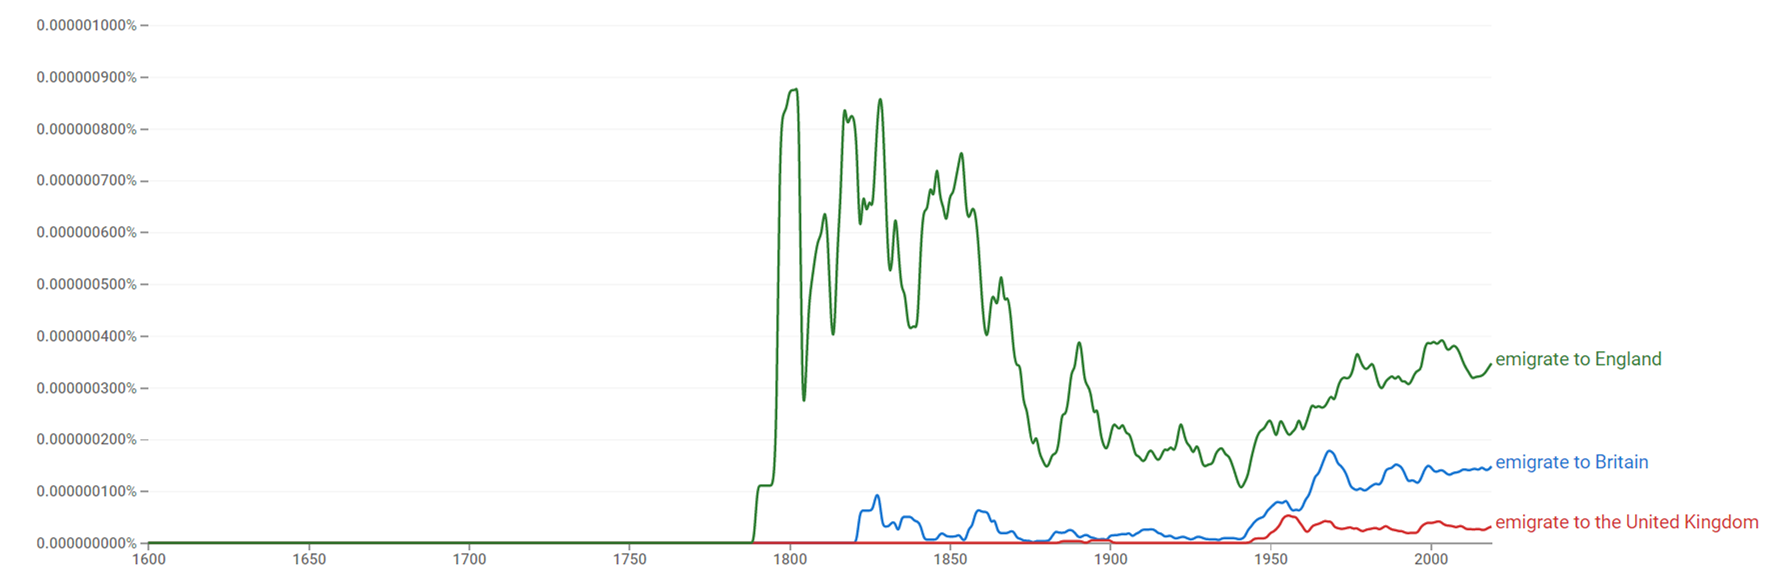 Emigrate to Britain, United Kingdom and England ngram.png